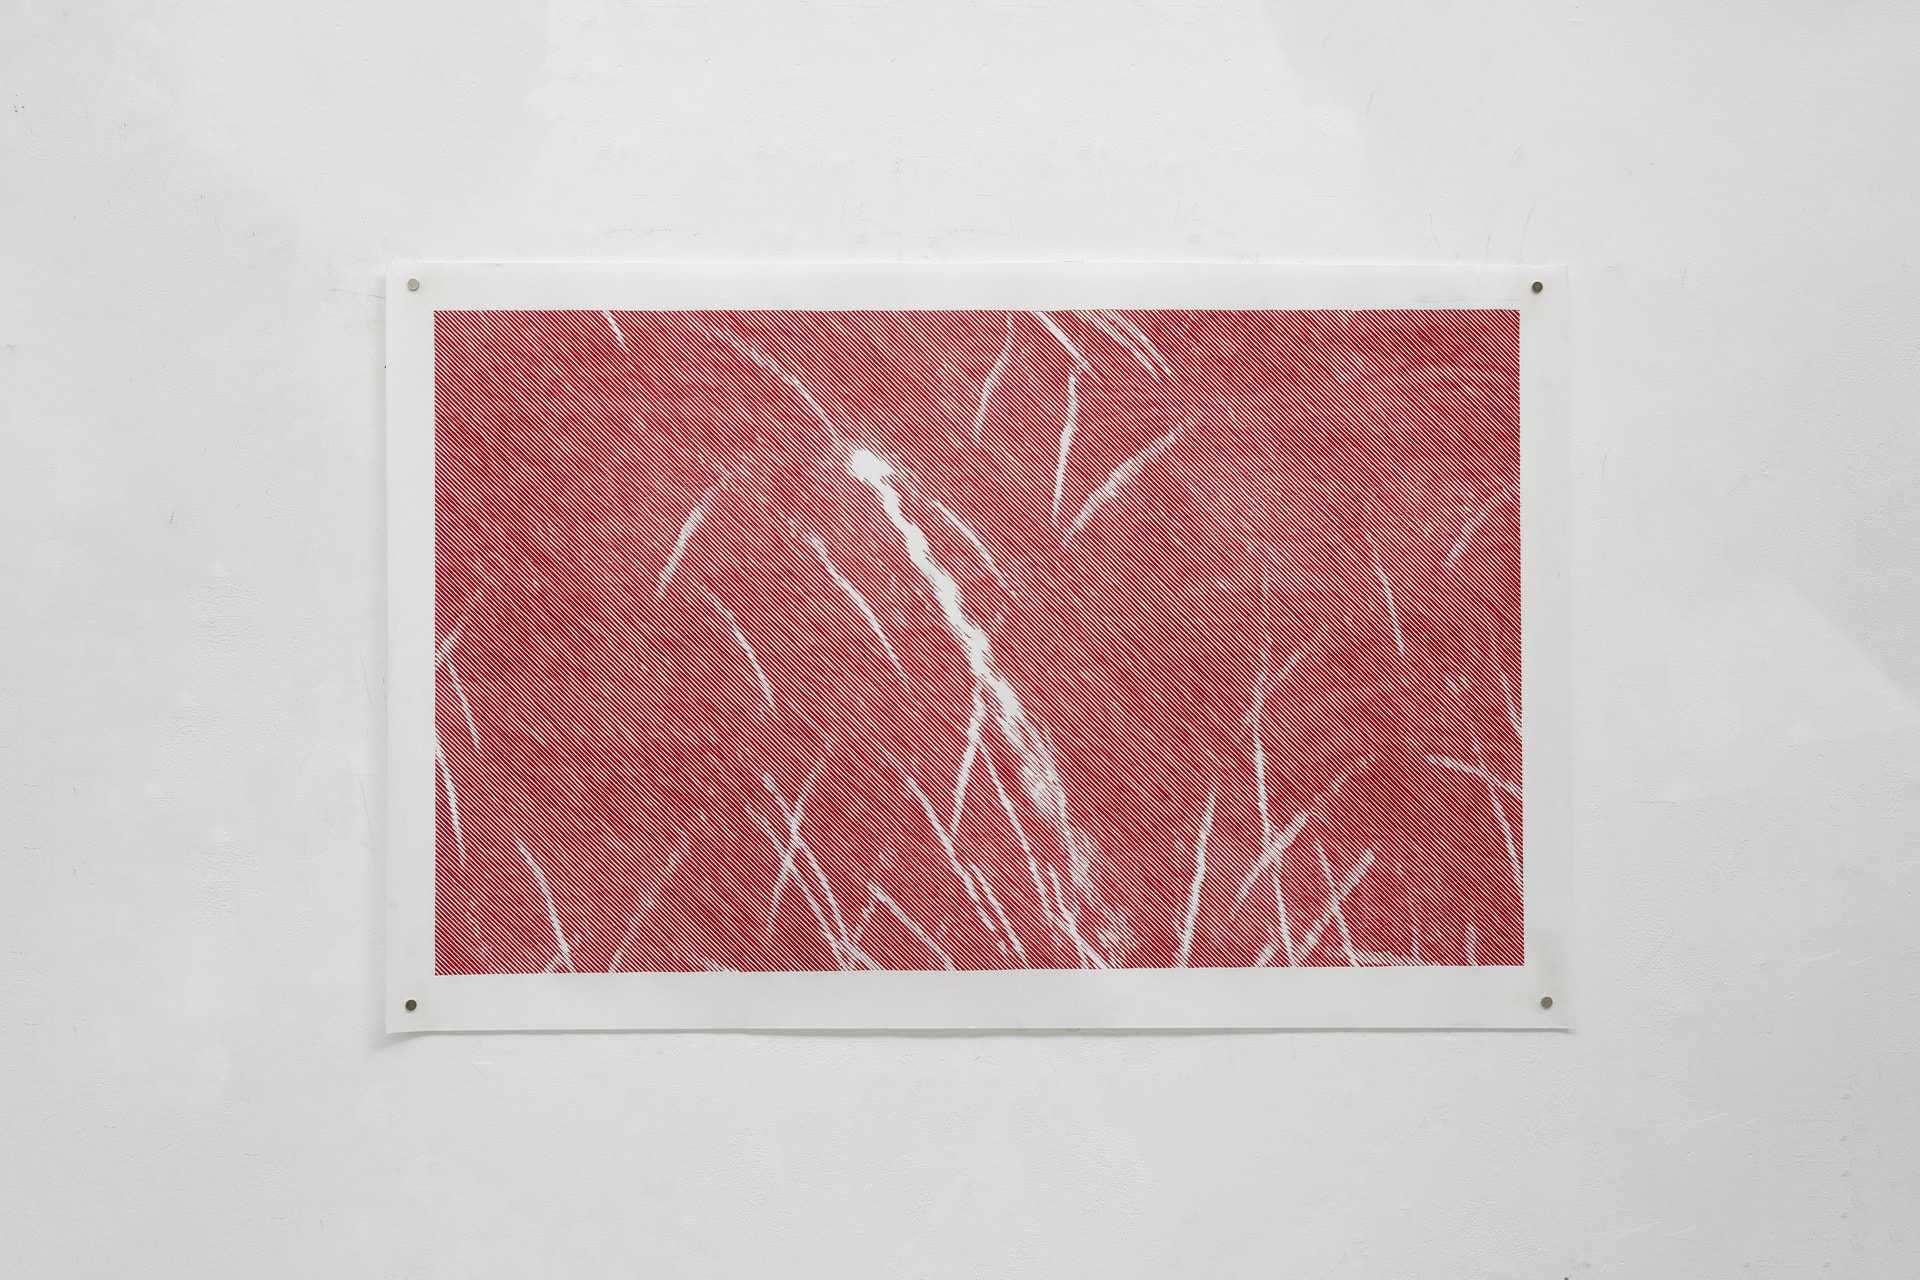 Woodcut, Hand printing with lithography ink on Chinese Xuan paper, 104cm x 66cm